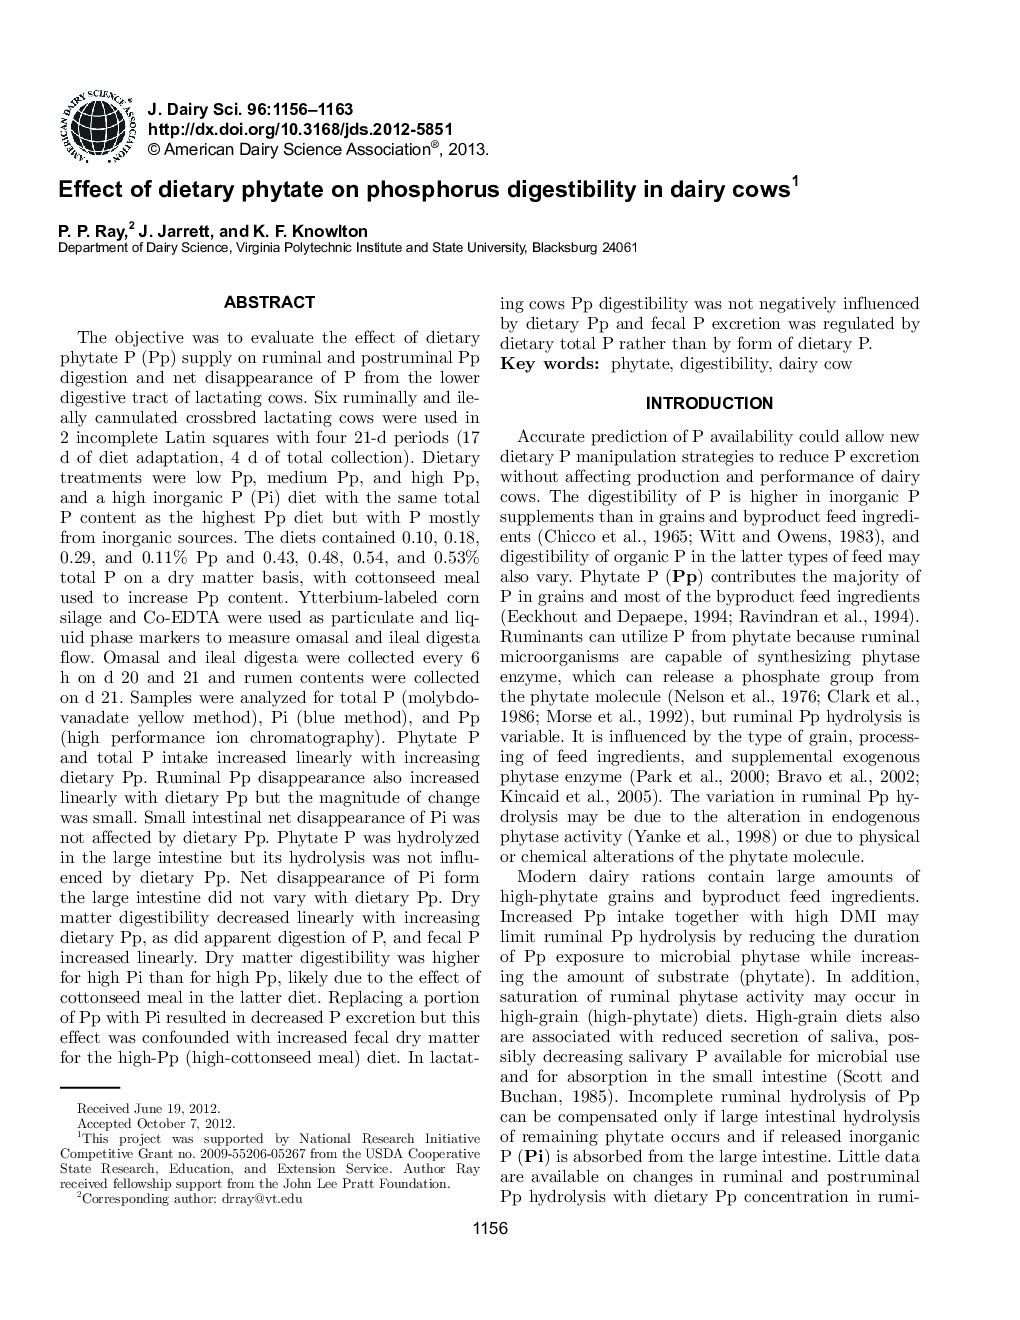 Effect of dietary phytate on phosphorus digestibility in dairy cows1